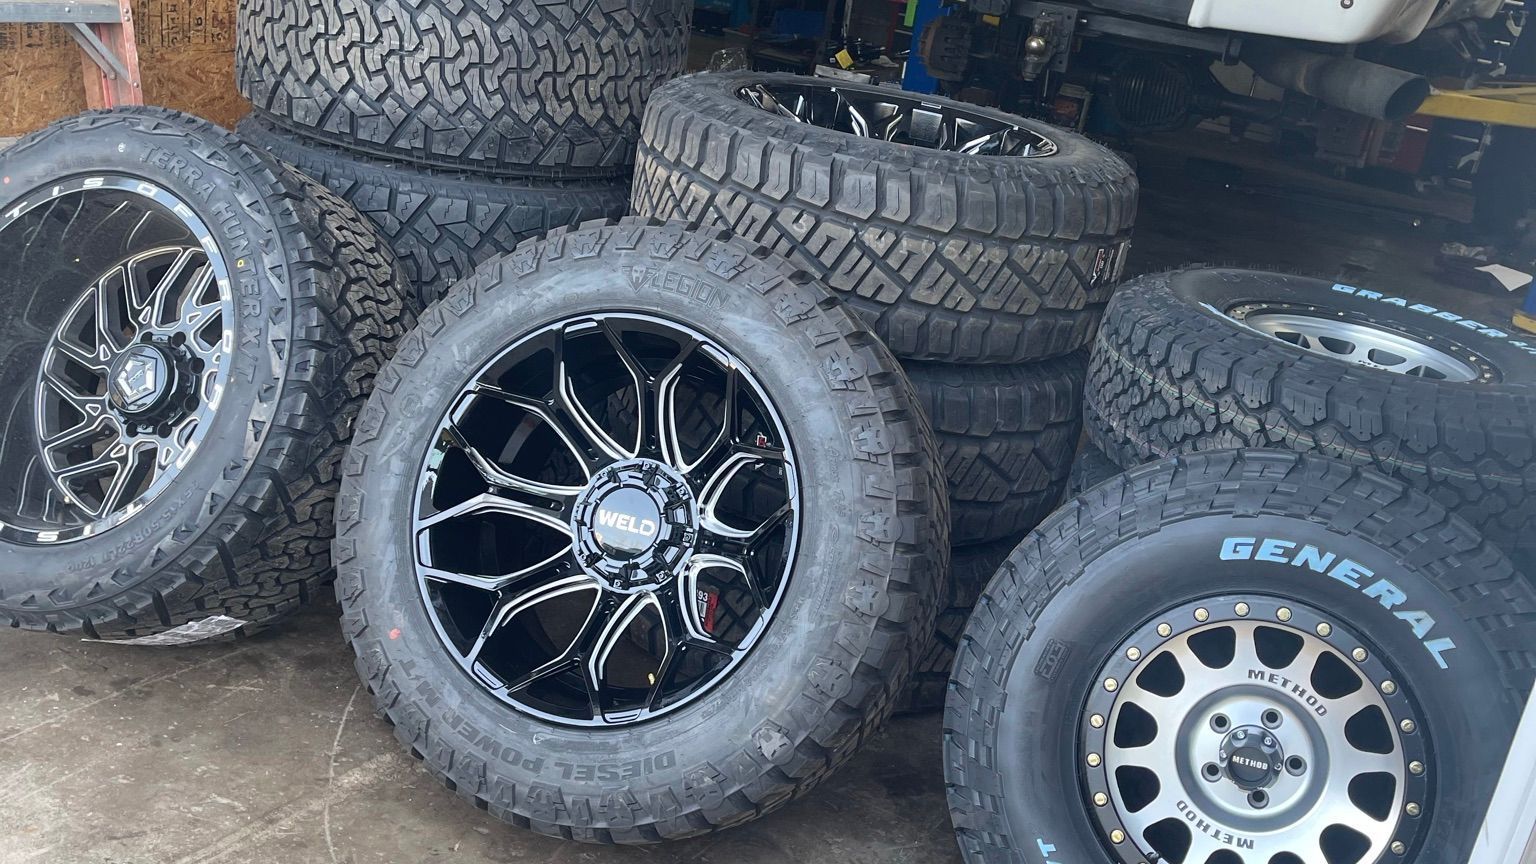 Find Tires at Fast Friendly Repair & Towing in Painesville, OH